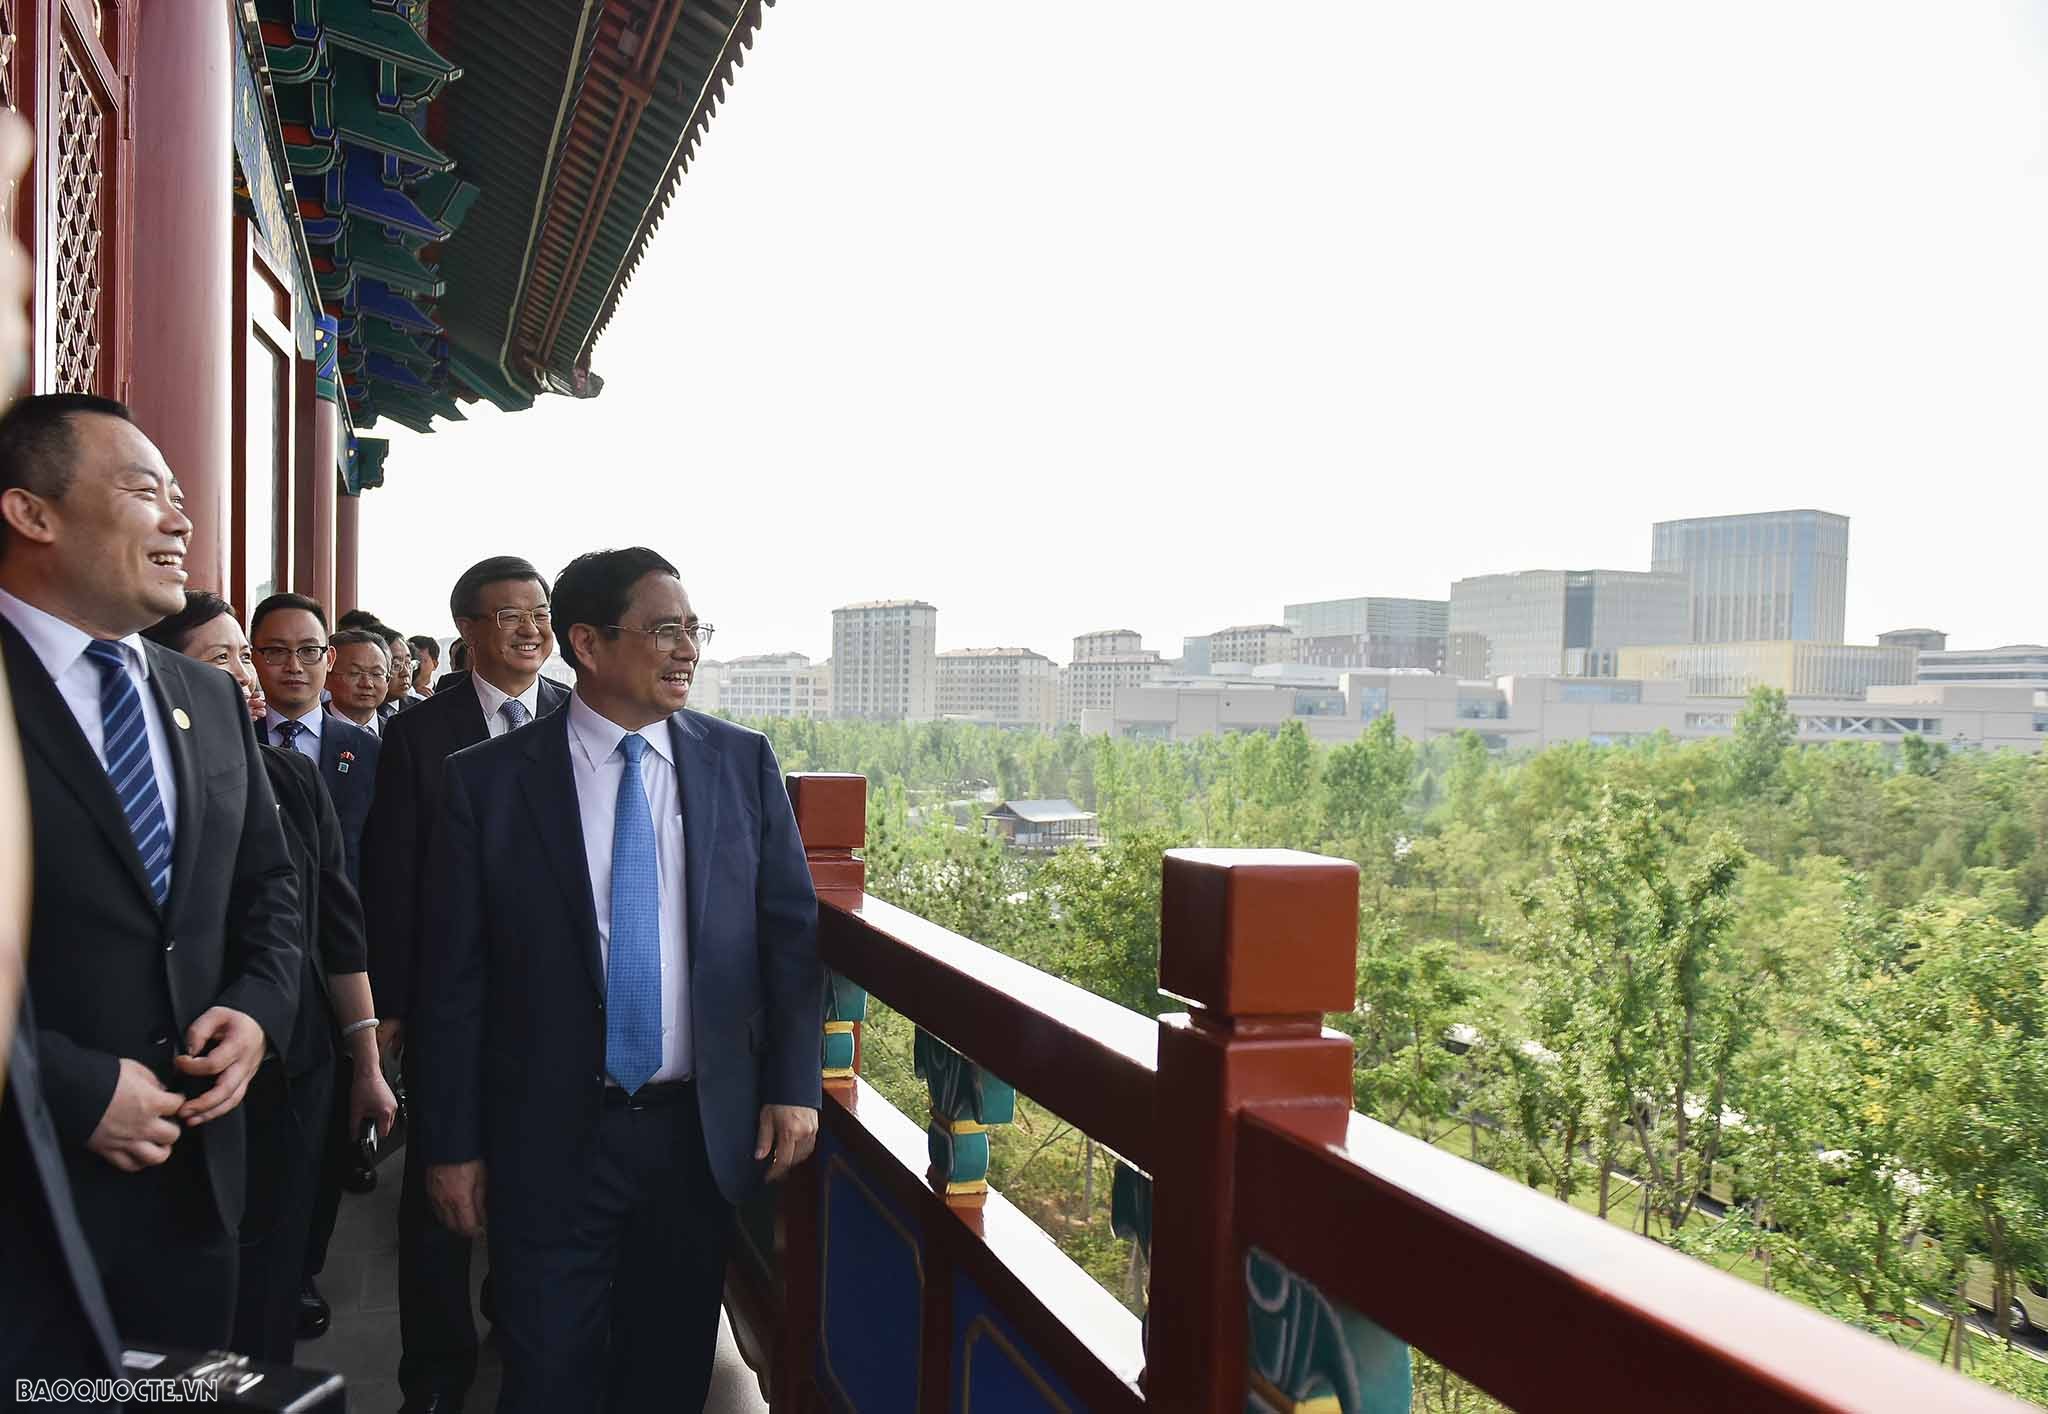 Prime Minister Pham Minh Chinh visits China’s Xiong'an New Area